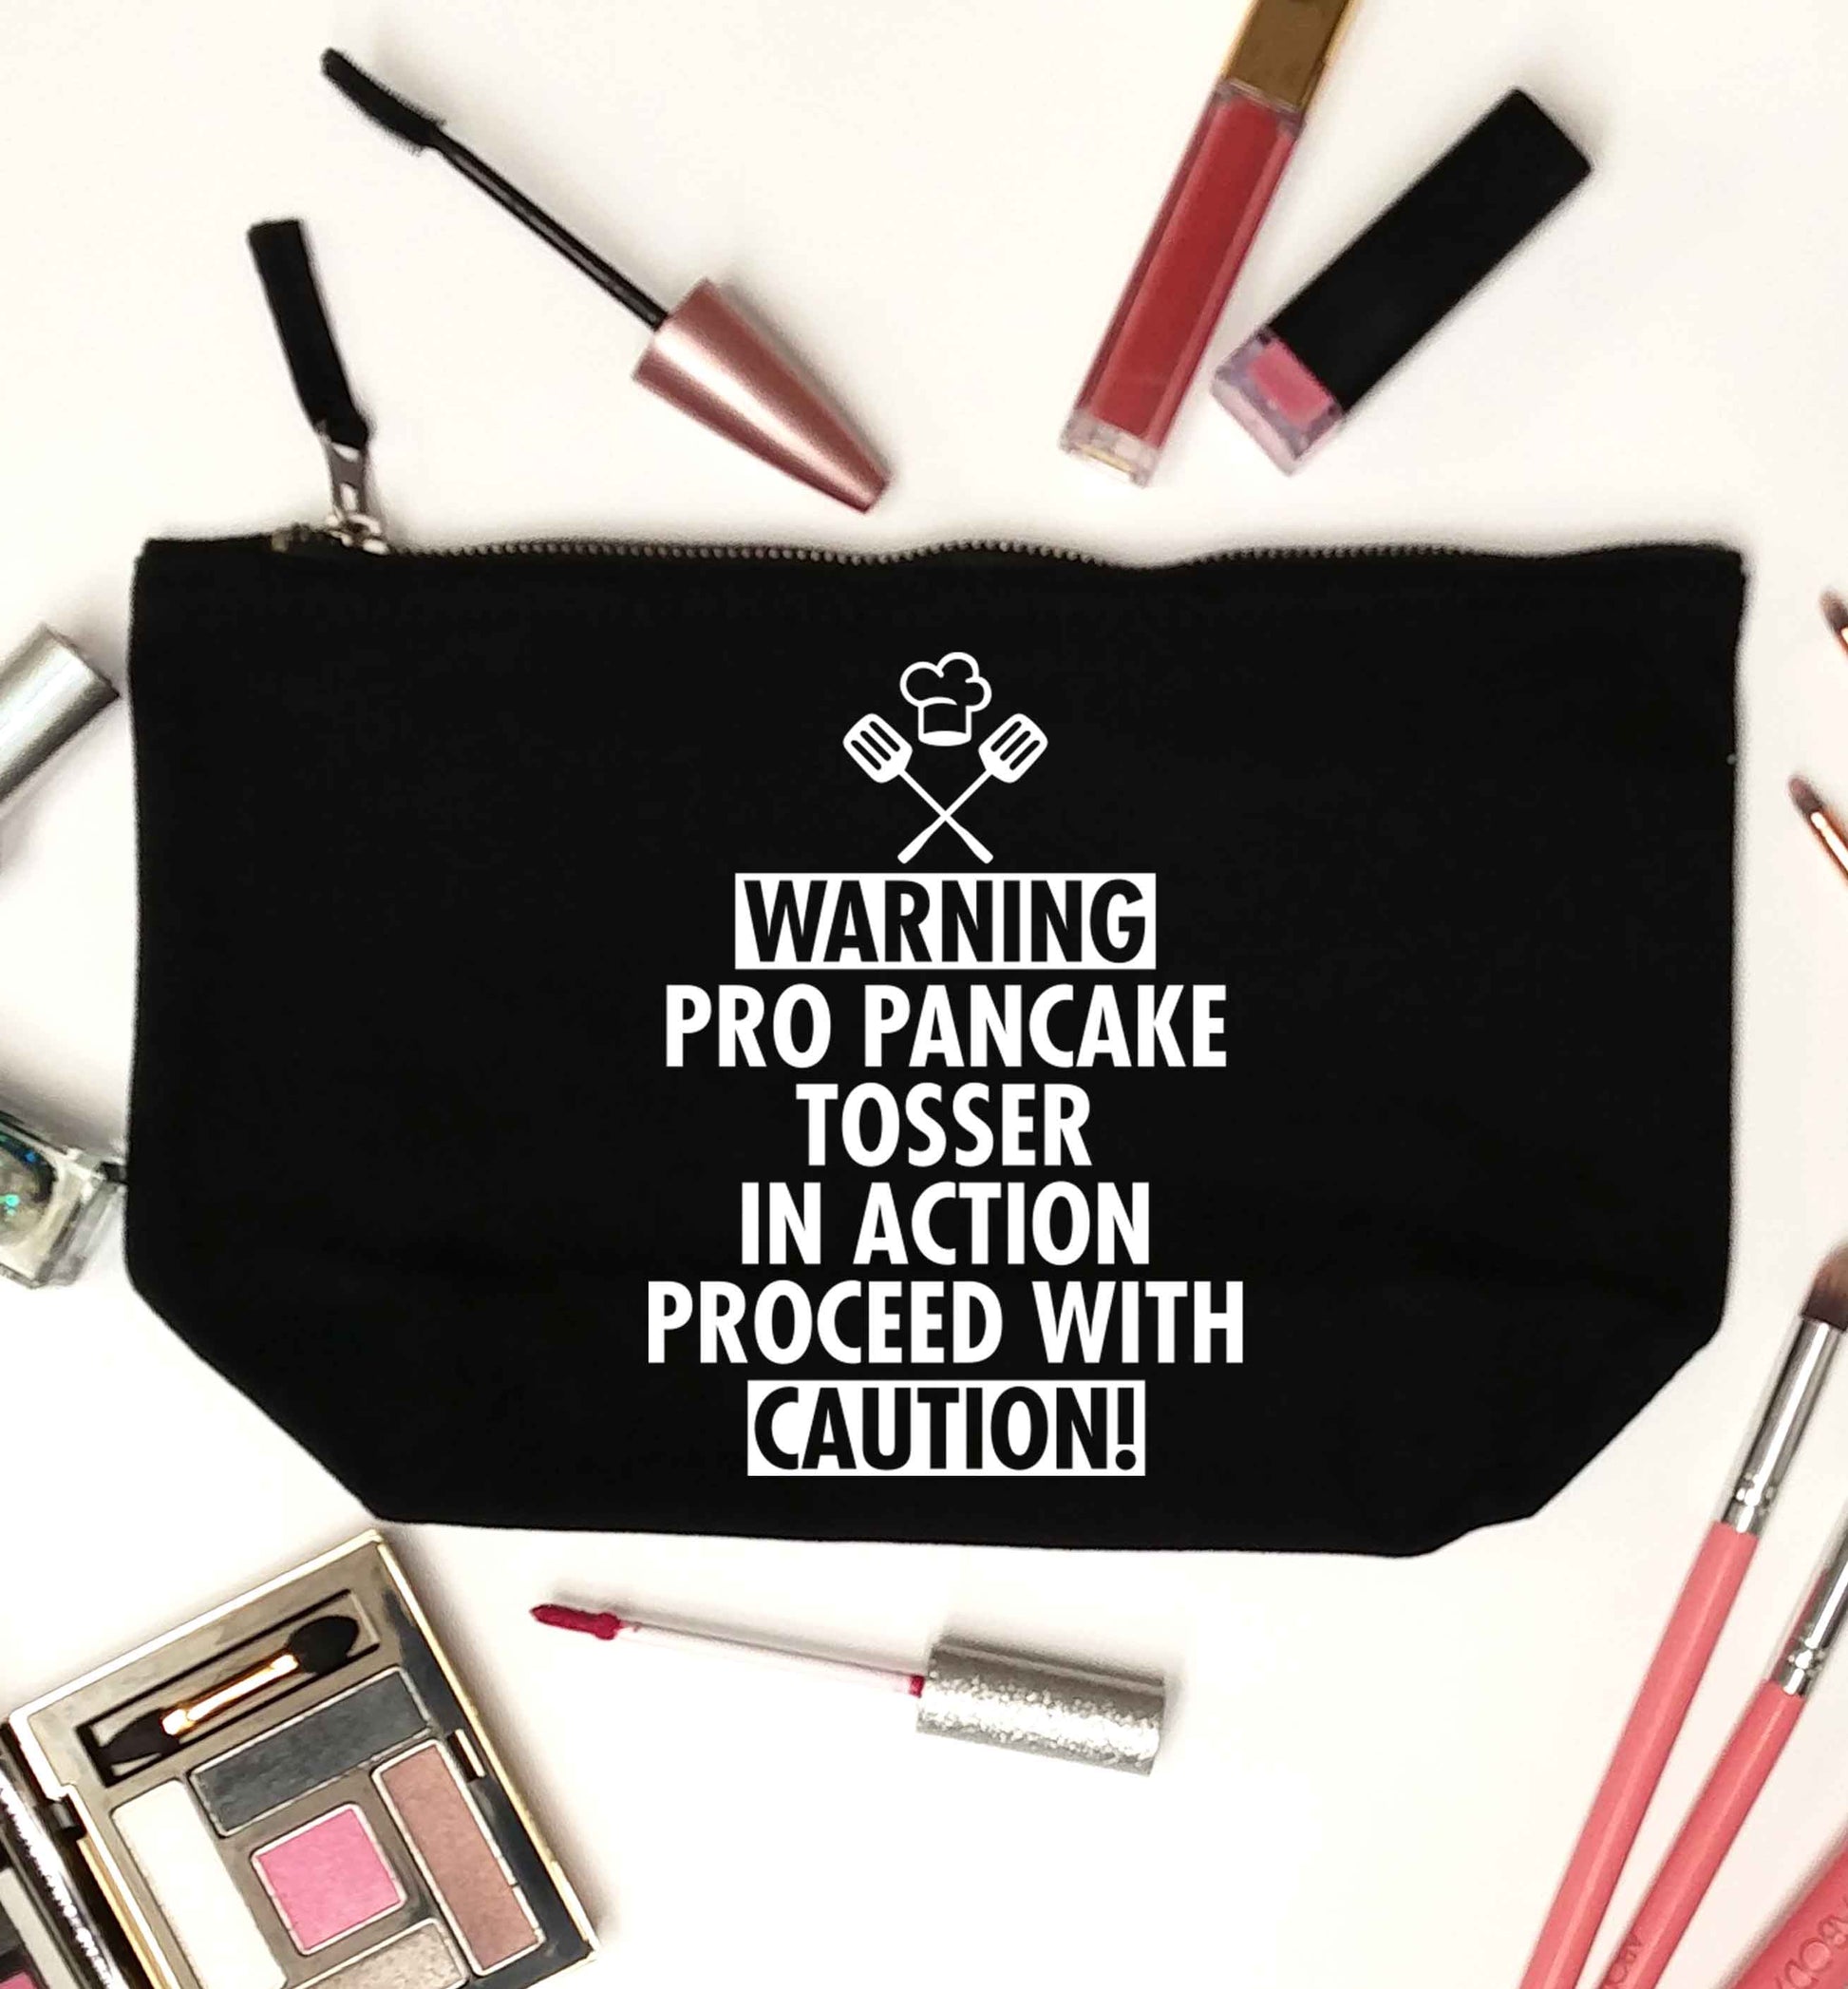 Warning pro pancake tosser in action proceed with caution black makeup bag